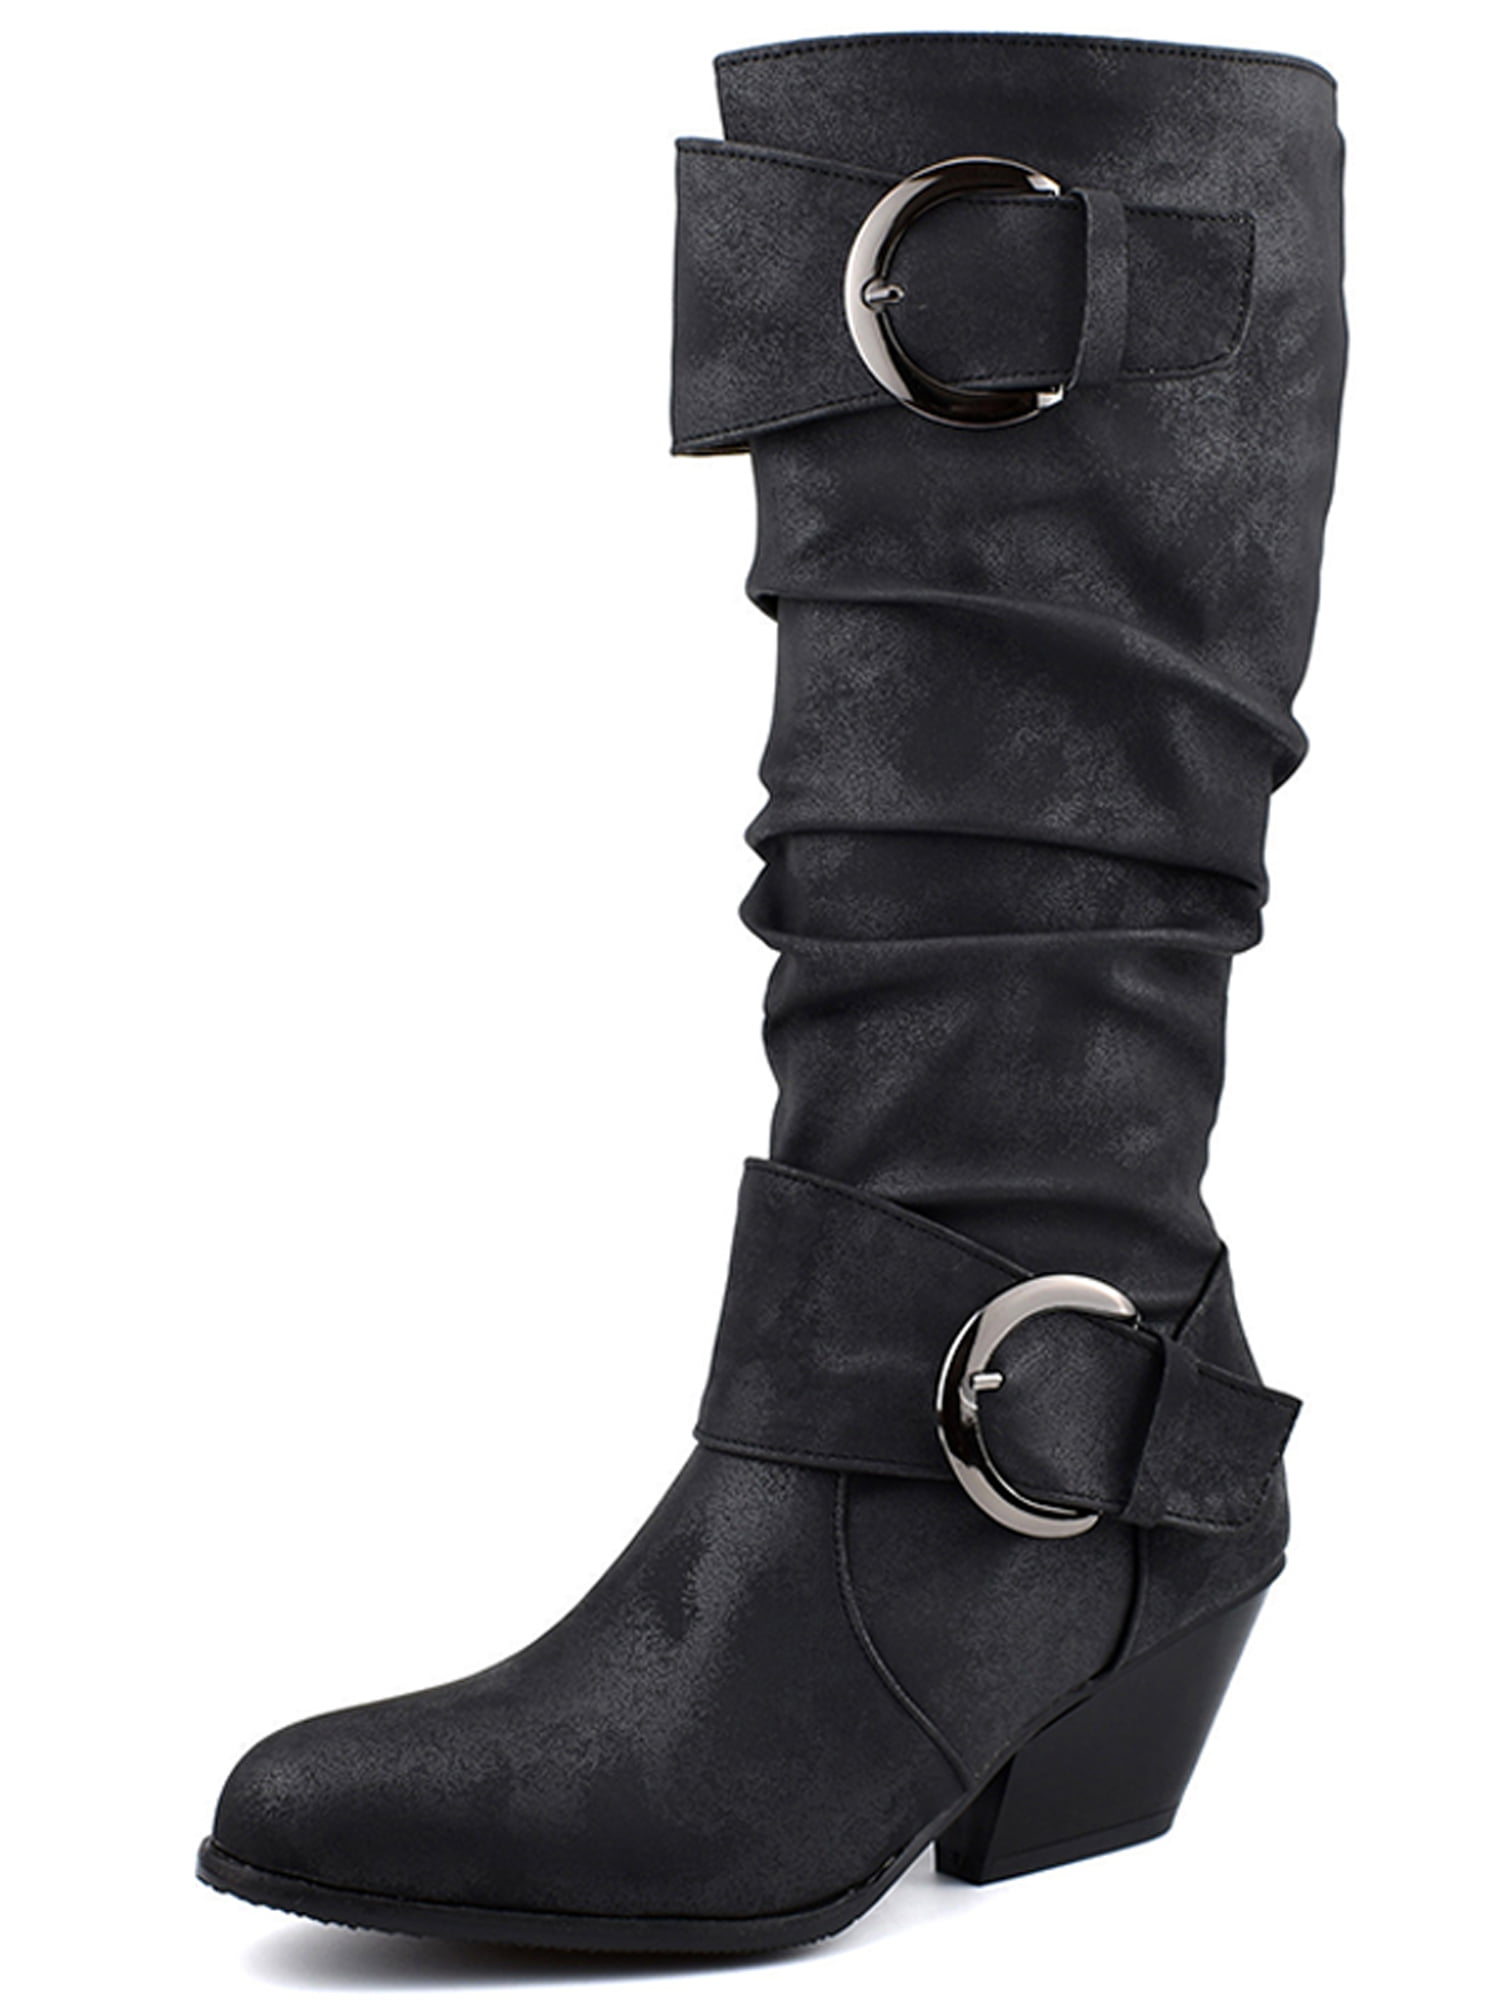 Wodstyle - Women's Slouch Boots Winter Warm Mid-Calf Chunky Buckle ...